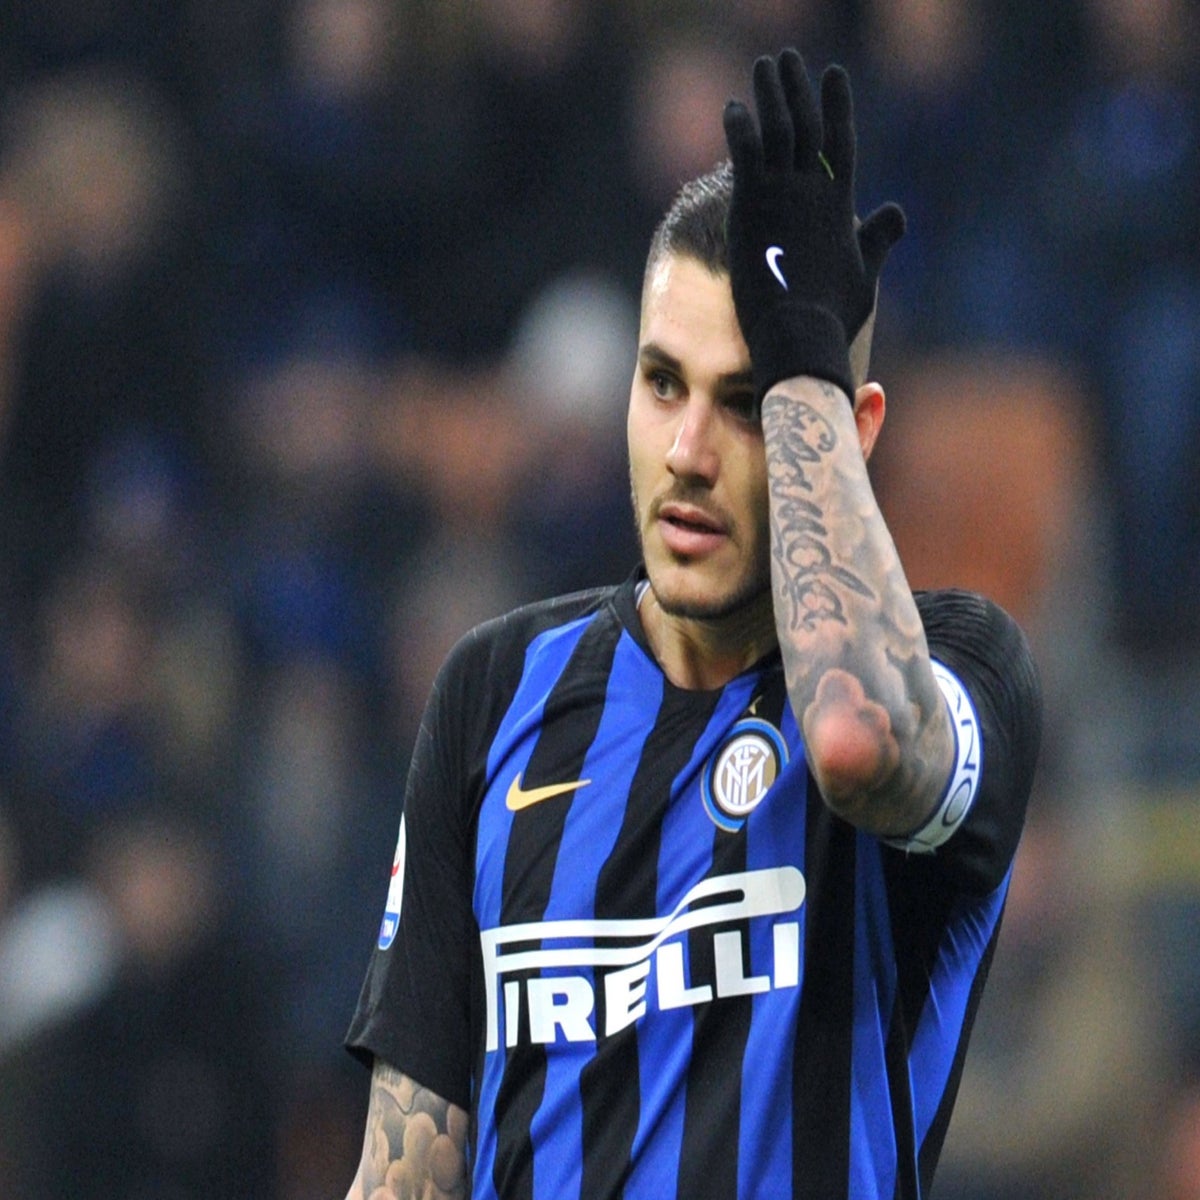 https://static.independent.co.uk/s3fs-public/thumbnails/image/2019/02/13/19/Mauro-Icardi.jpg?width=1200&height=1200&fit=crop